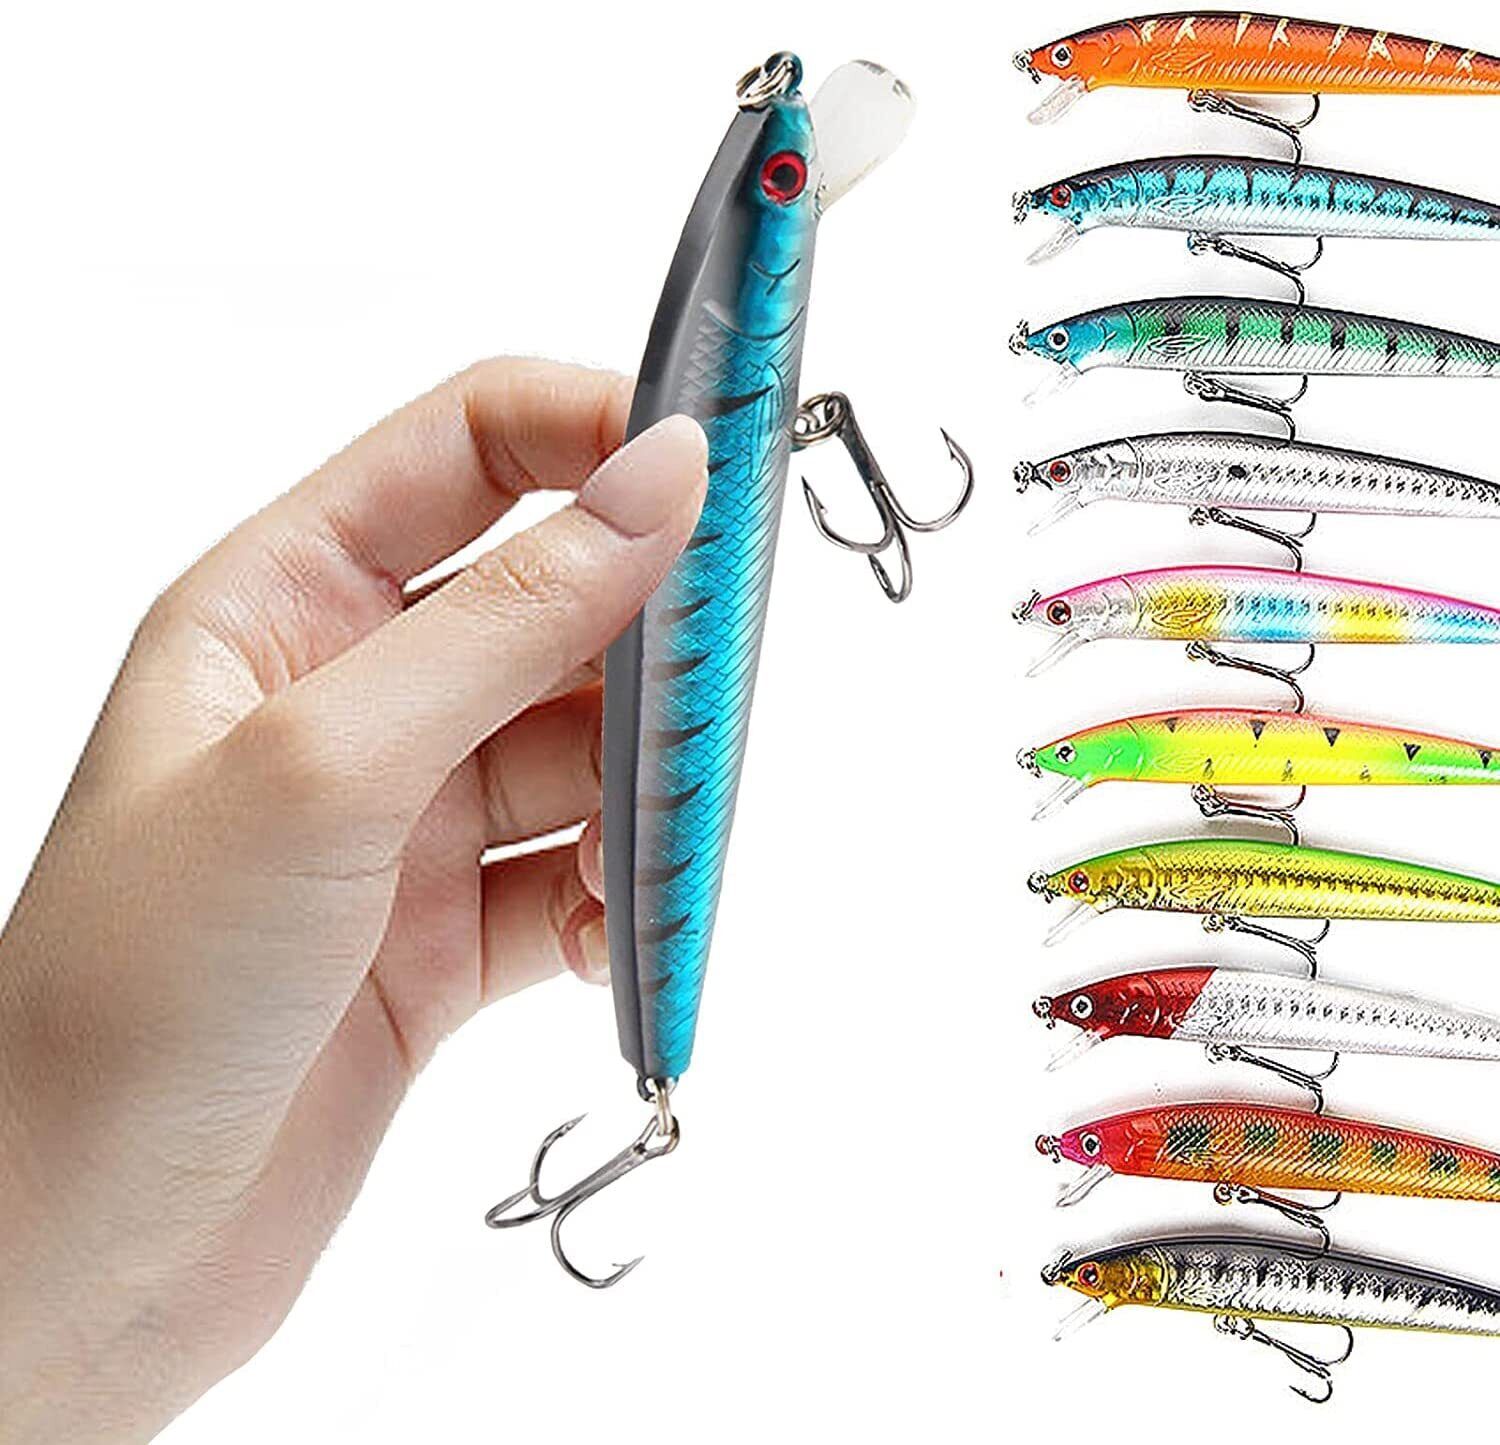 10PCS Fishing Lures Minnow baits Crankbaits Jerkbait Lot Hooks Baits Bass Tackle Unbranded Does Not Apply